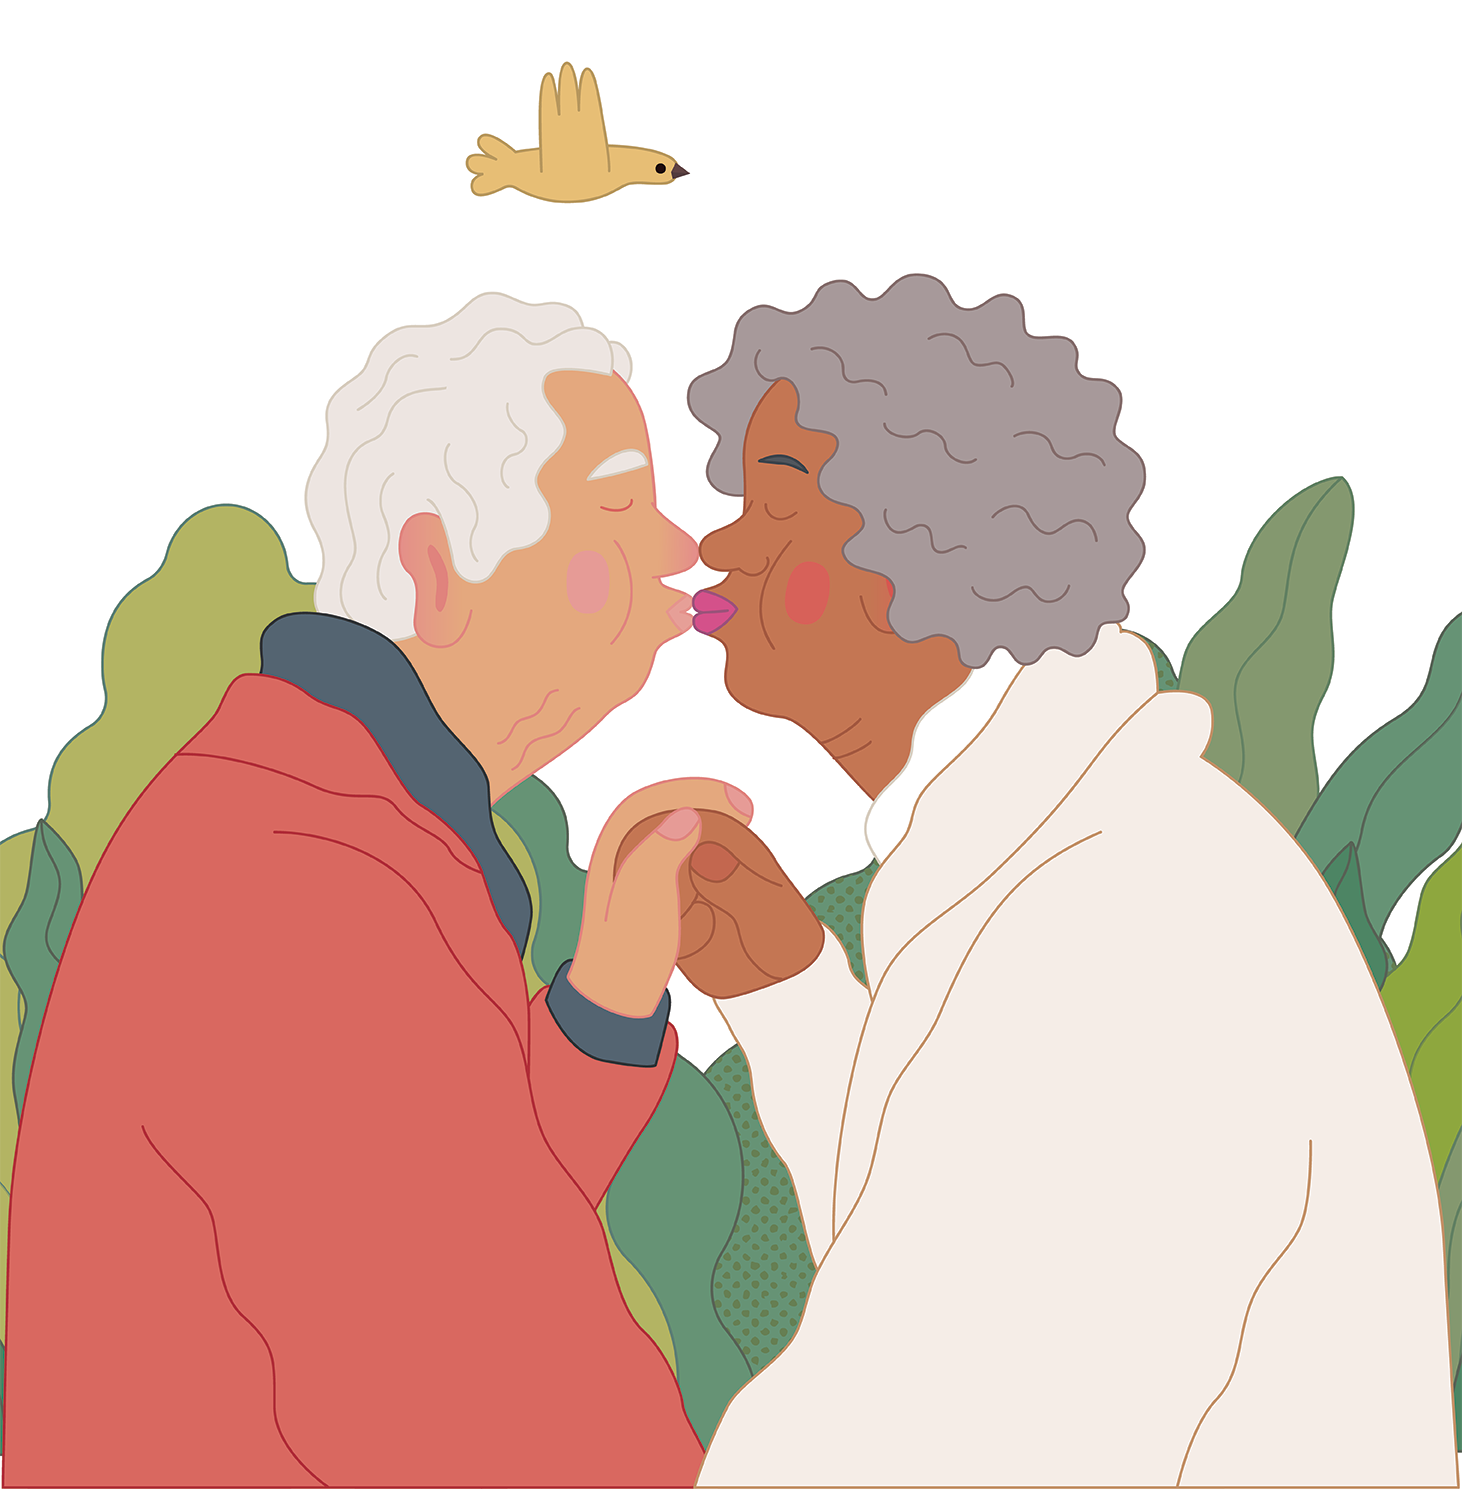 Intimacy and people living with dementia